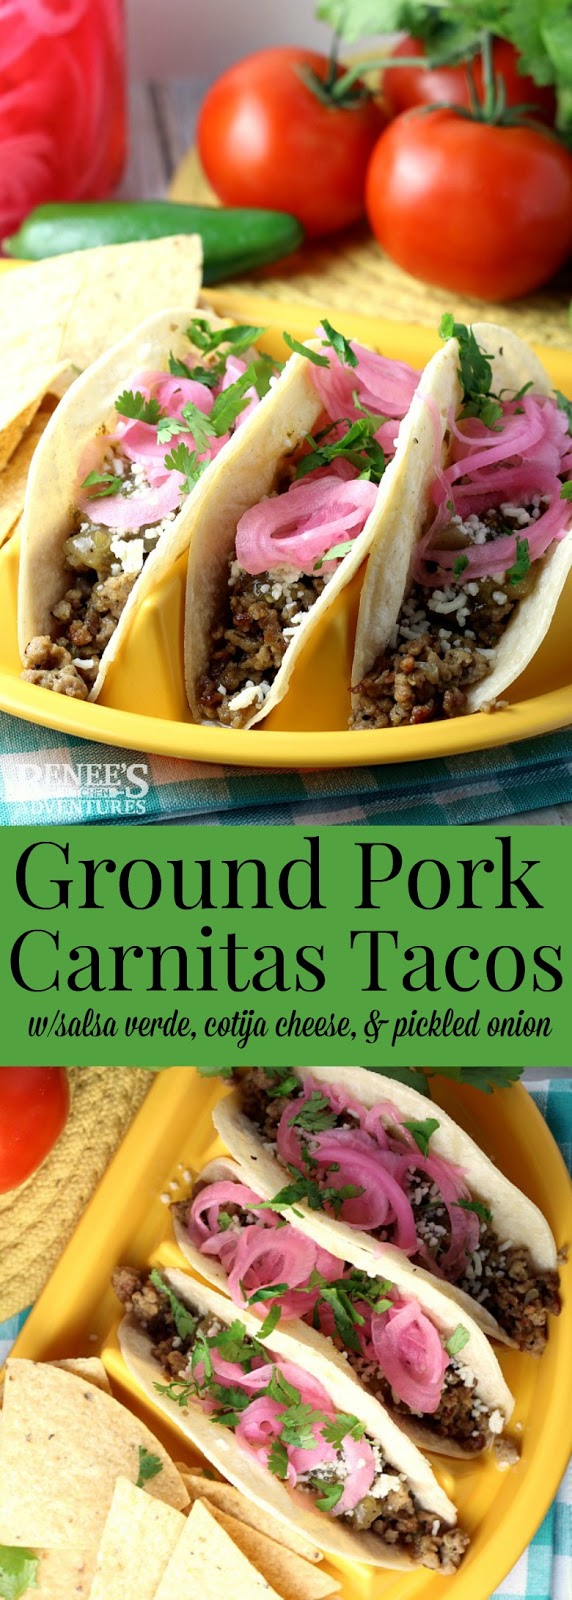 Ground Pork Carnitas Tacos | Renee's Kitchen Adventures - easy recipe made with seasoned ground pork, salsa verde, cotija cheese, cilantro and pickled onions for carnitas in about 30 minutes!  Perfect dinner or lunch recipe to celebrate Cinco de Mayo! 